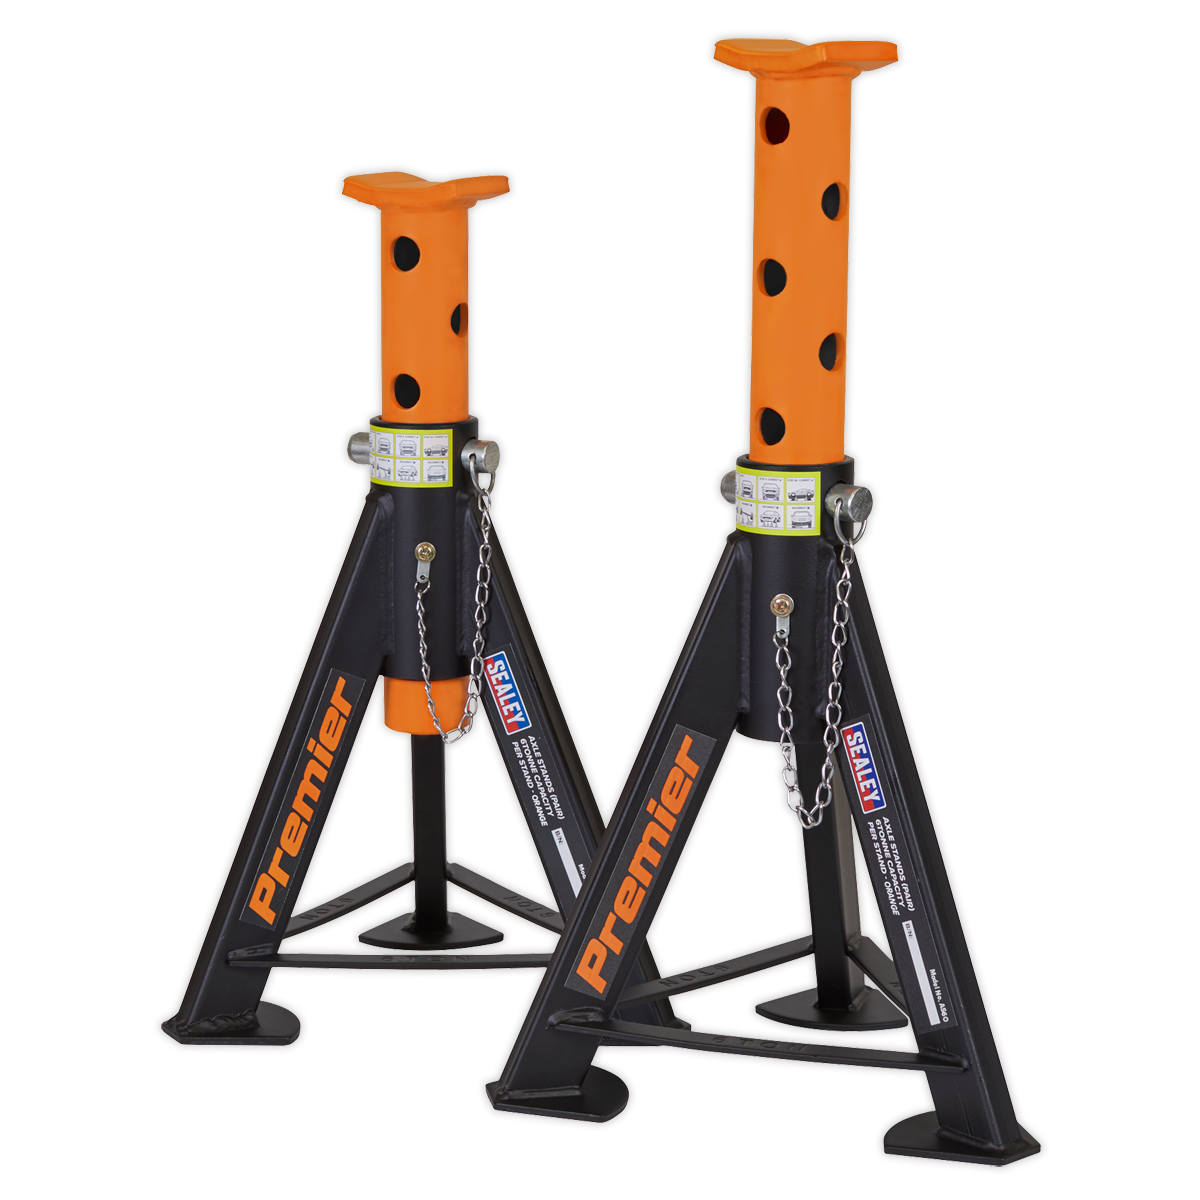 SEALEY - AS6O Axle Stands (Pair) 6tonne Capacity per Stand - Orange